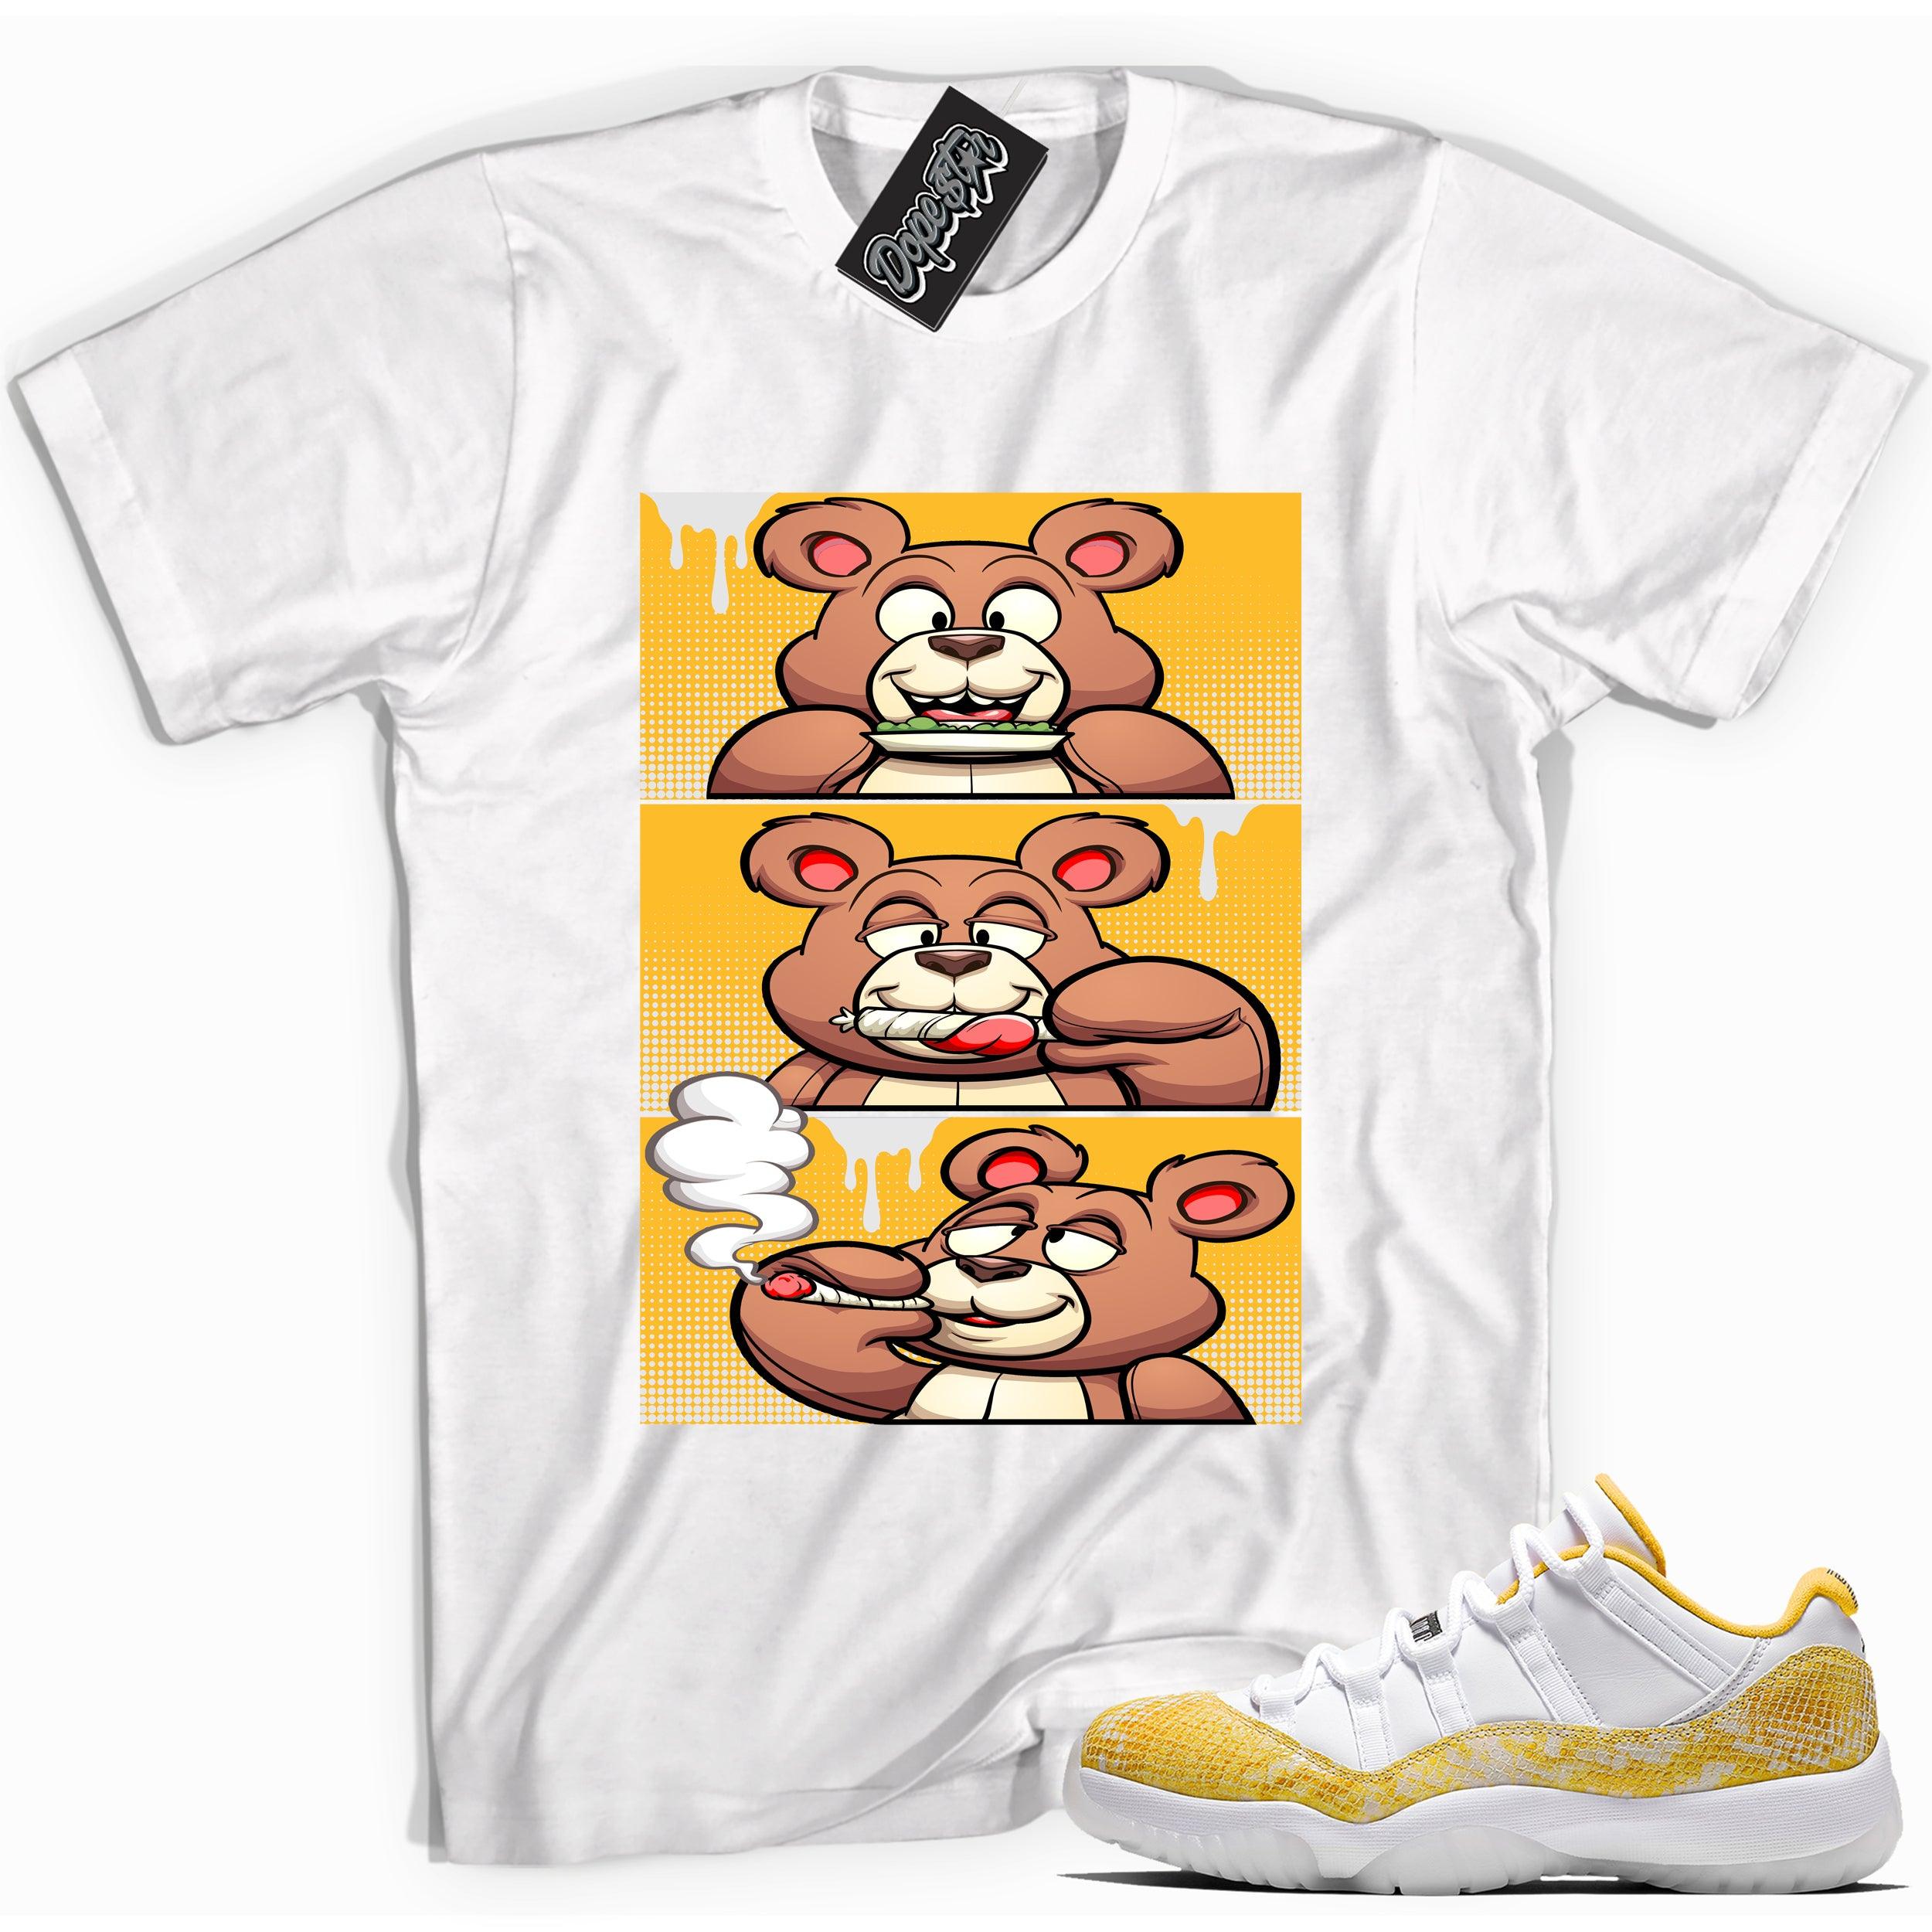 Cool white graphic tee with 'roll it lick it smoke it bear' print, that perfectly matches Air Jordan 11 Retro Low Yellow Snakeskin sneakers